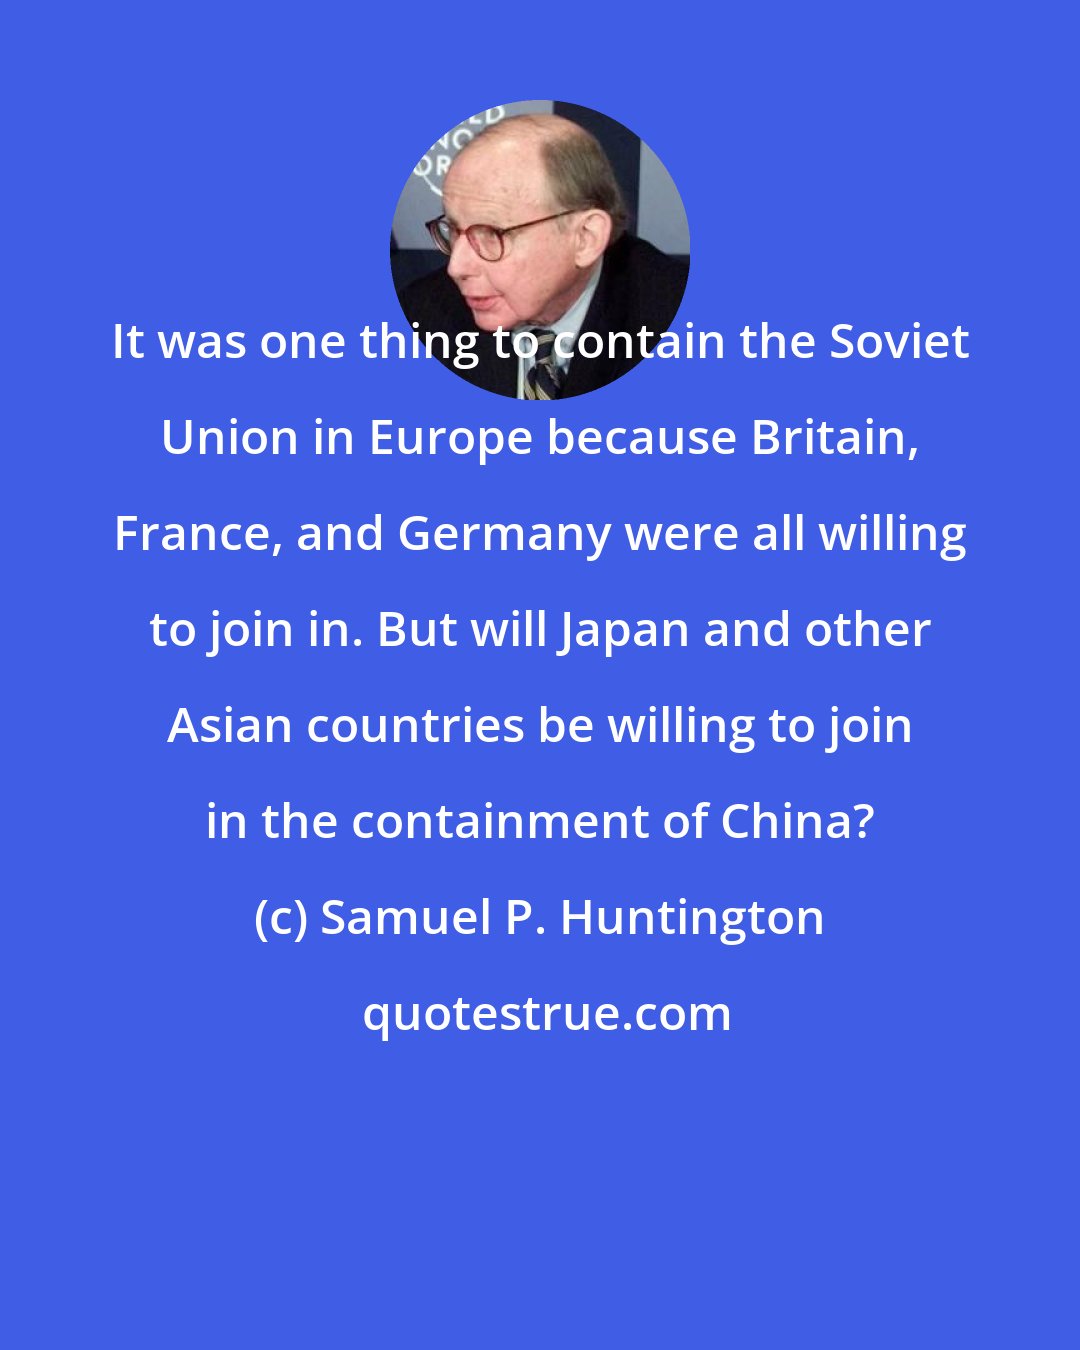 Samuel P. Huntington: It was one thing to contain the Soviet Union in Europe because Britain, France, and Germany were all willing to join in. But will Japan and other Asian countries be willing to join in the containment of China?